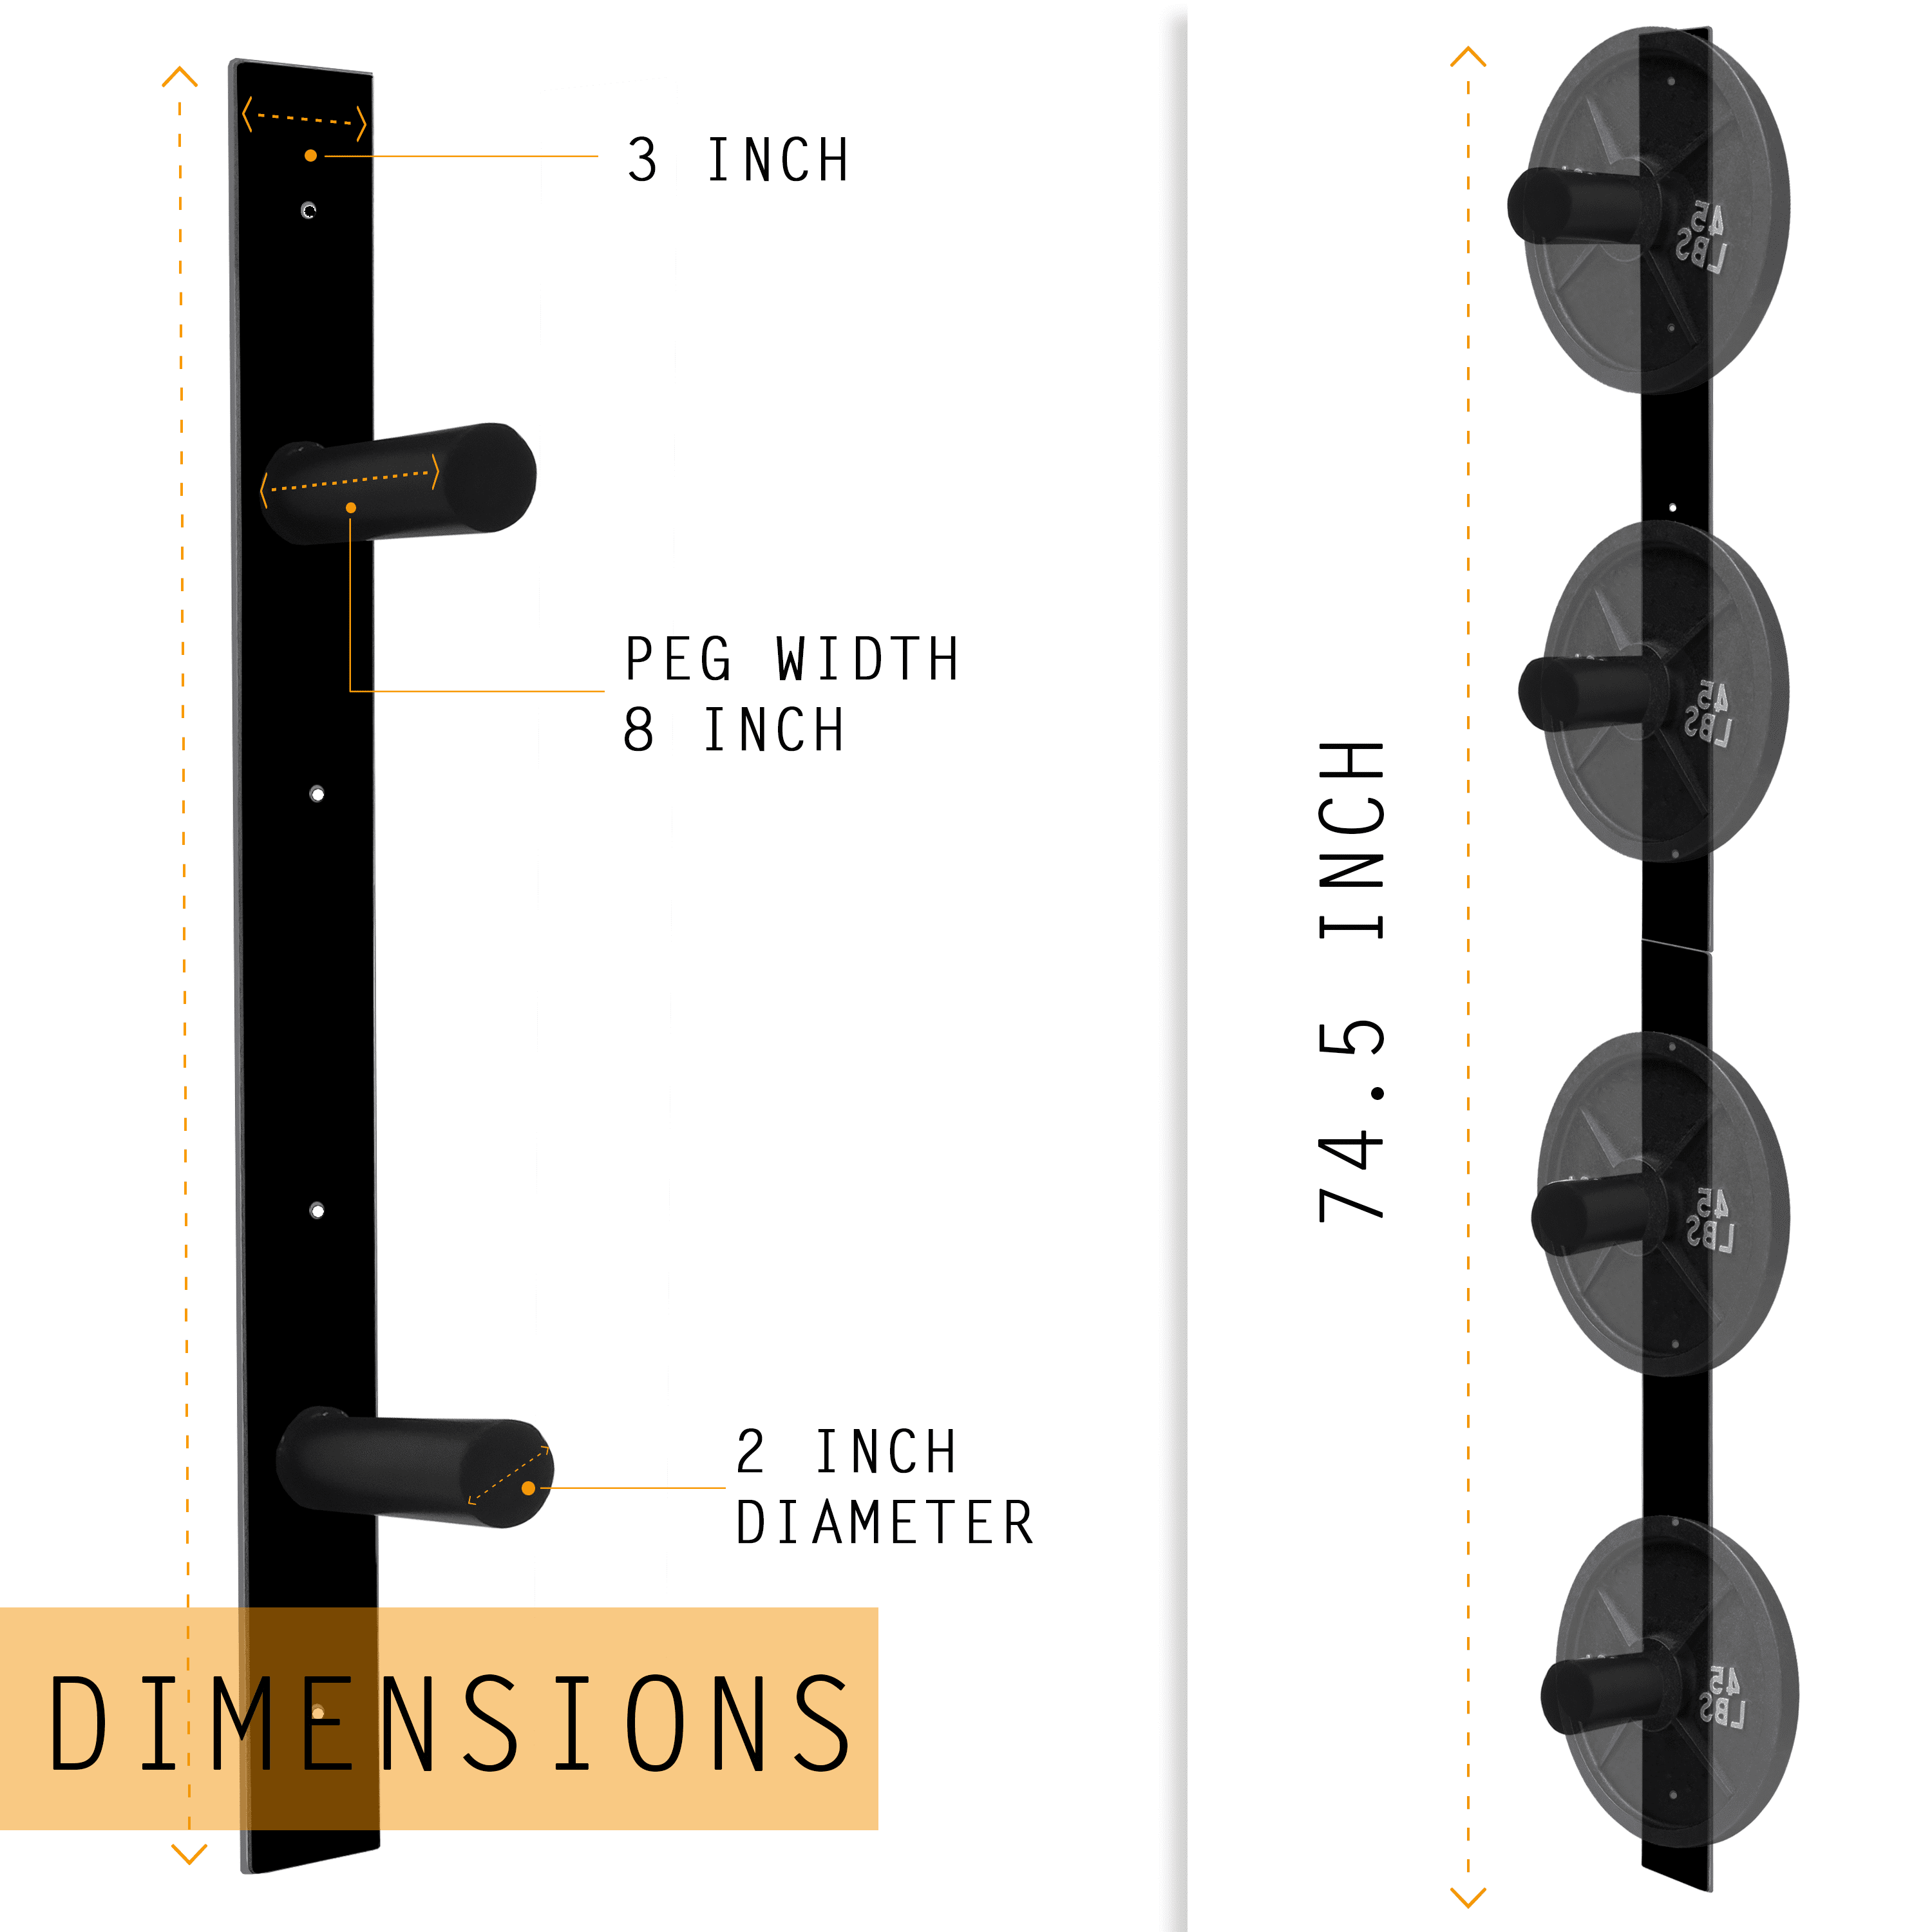 Weight Plate Wall Mounted Storage Rack - Angled 4-Peg Design - Olympic  Sized Weight Plate Organizer - Anchored Wall Mounted Storage